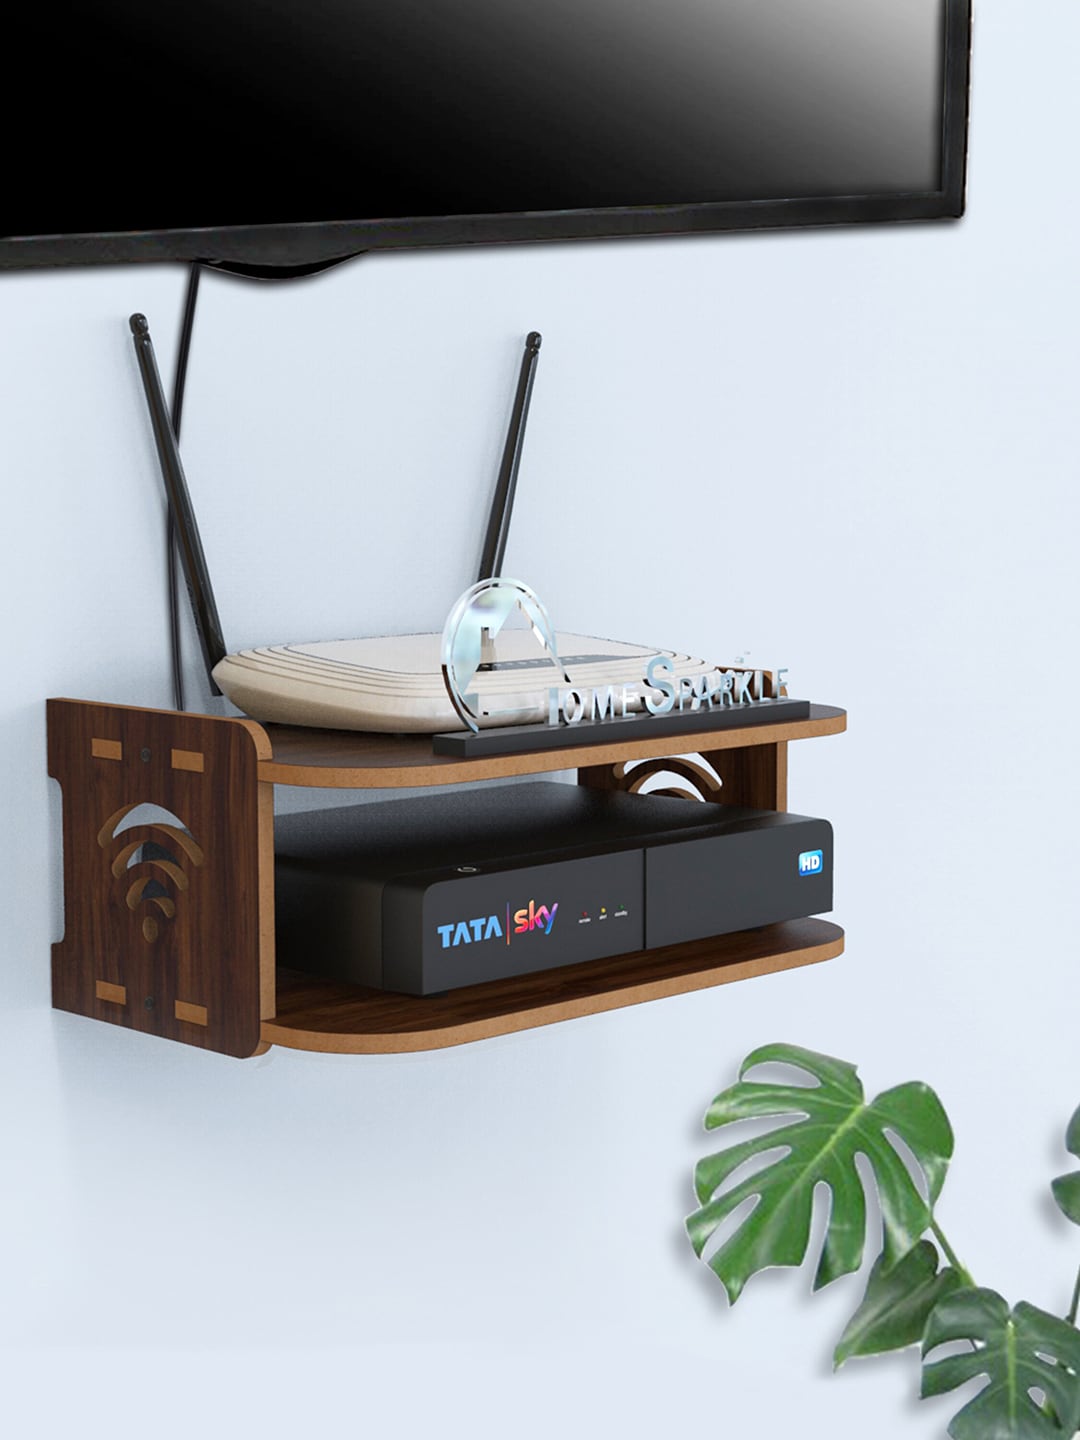 Home Sparkle Brown Straight Set Top Box Holder Floating Shelf Set top Box Stand Price in India